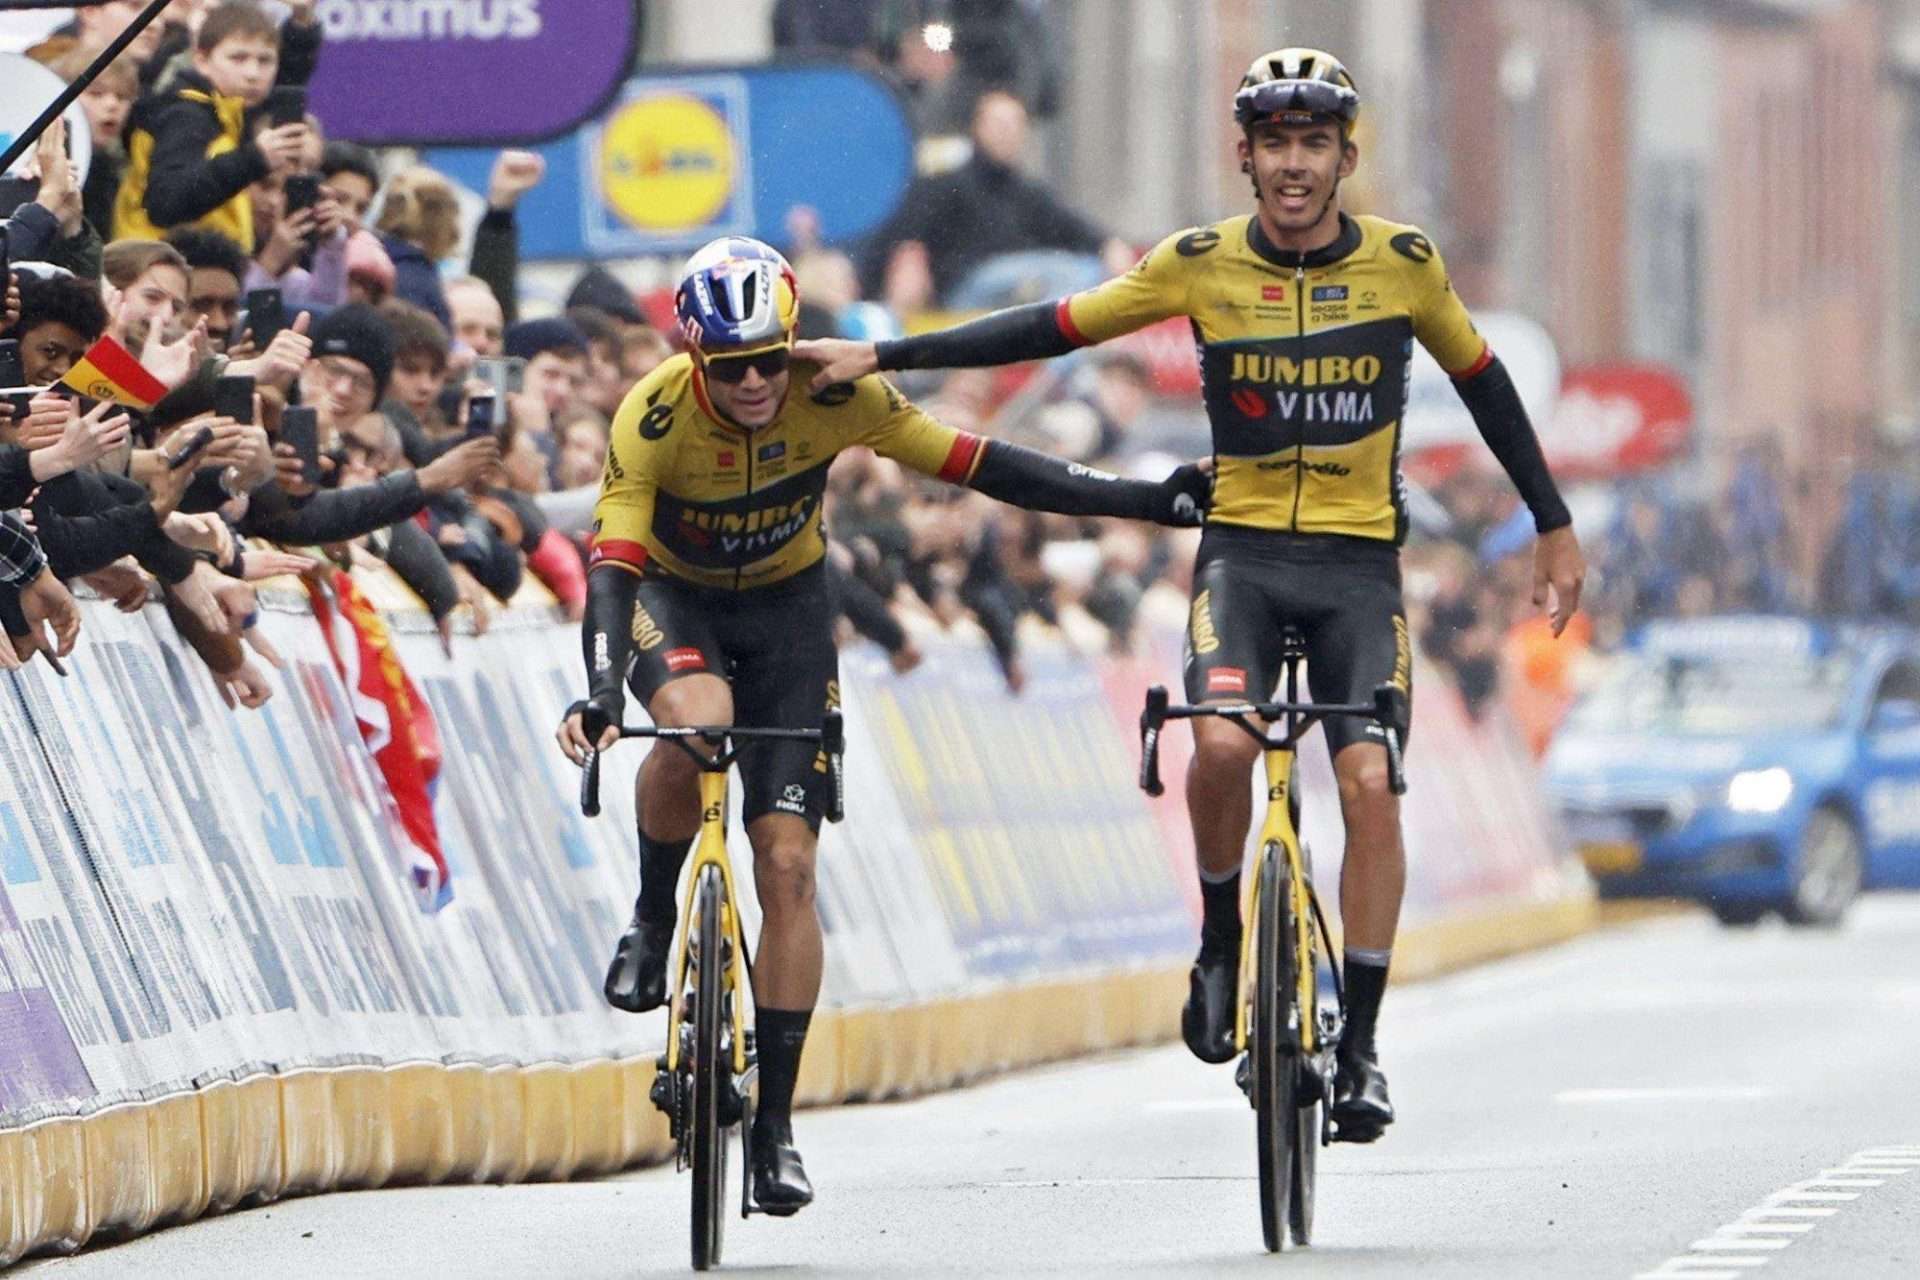 Christophe Laporte and Wout van Aert go one-two at Gent-Wevelgem.